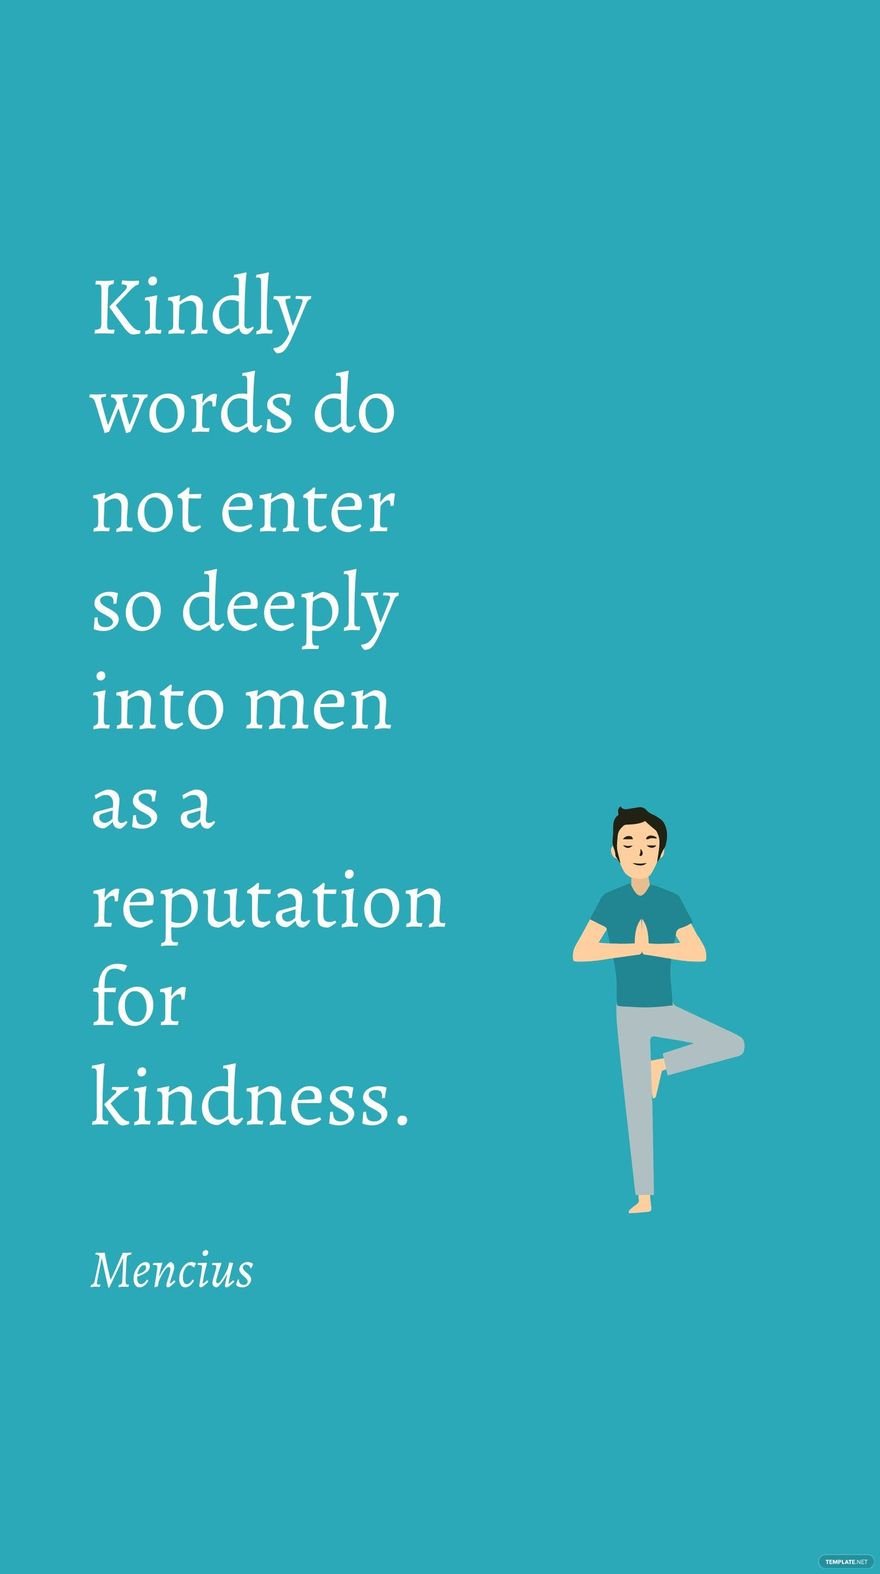 Mencius - Kindly words do not enter so deeply into men as a reputation for kindness.